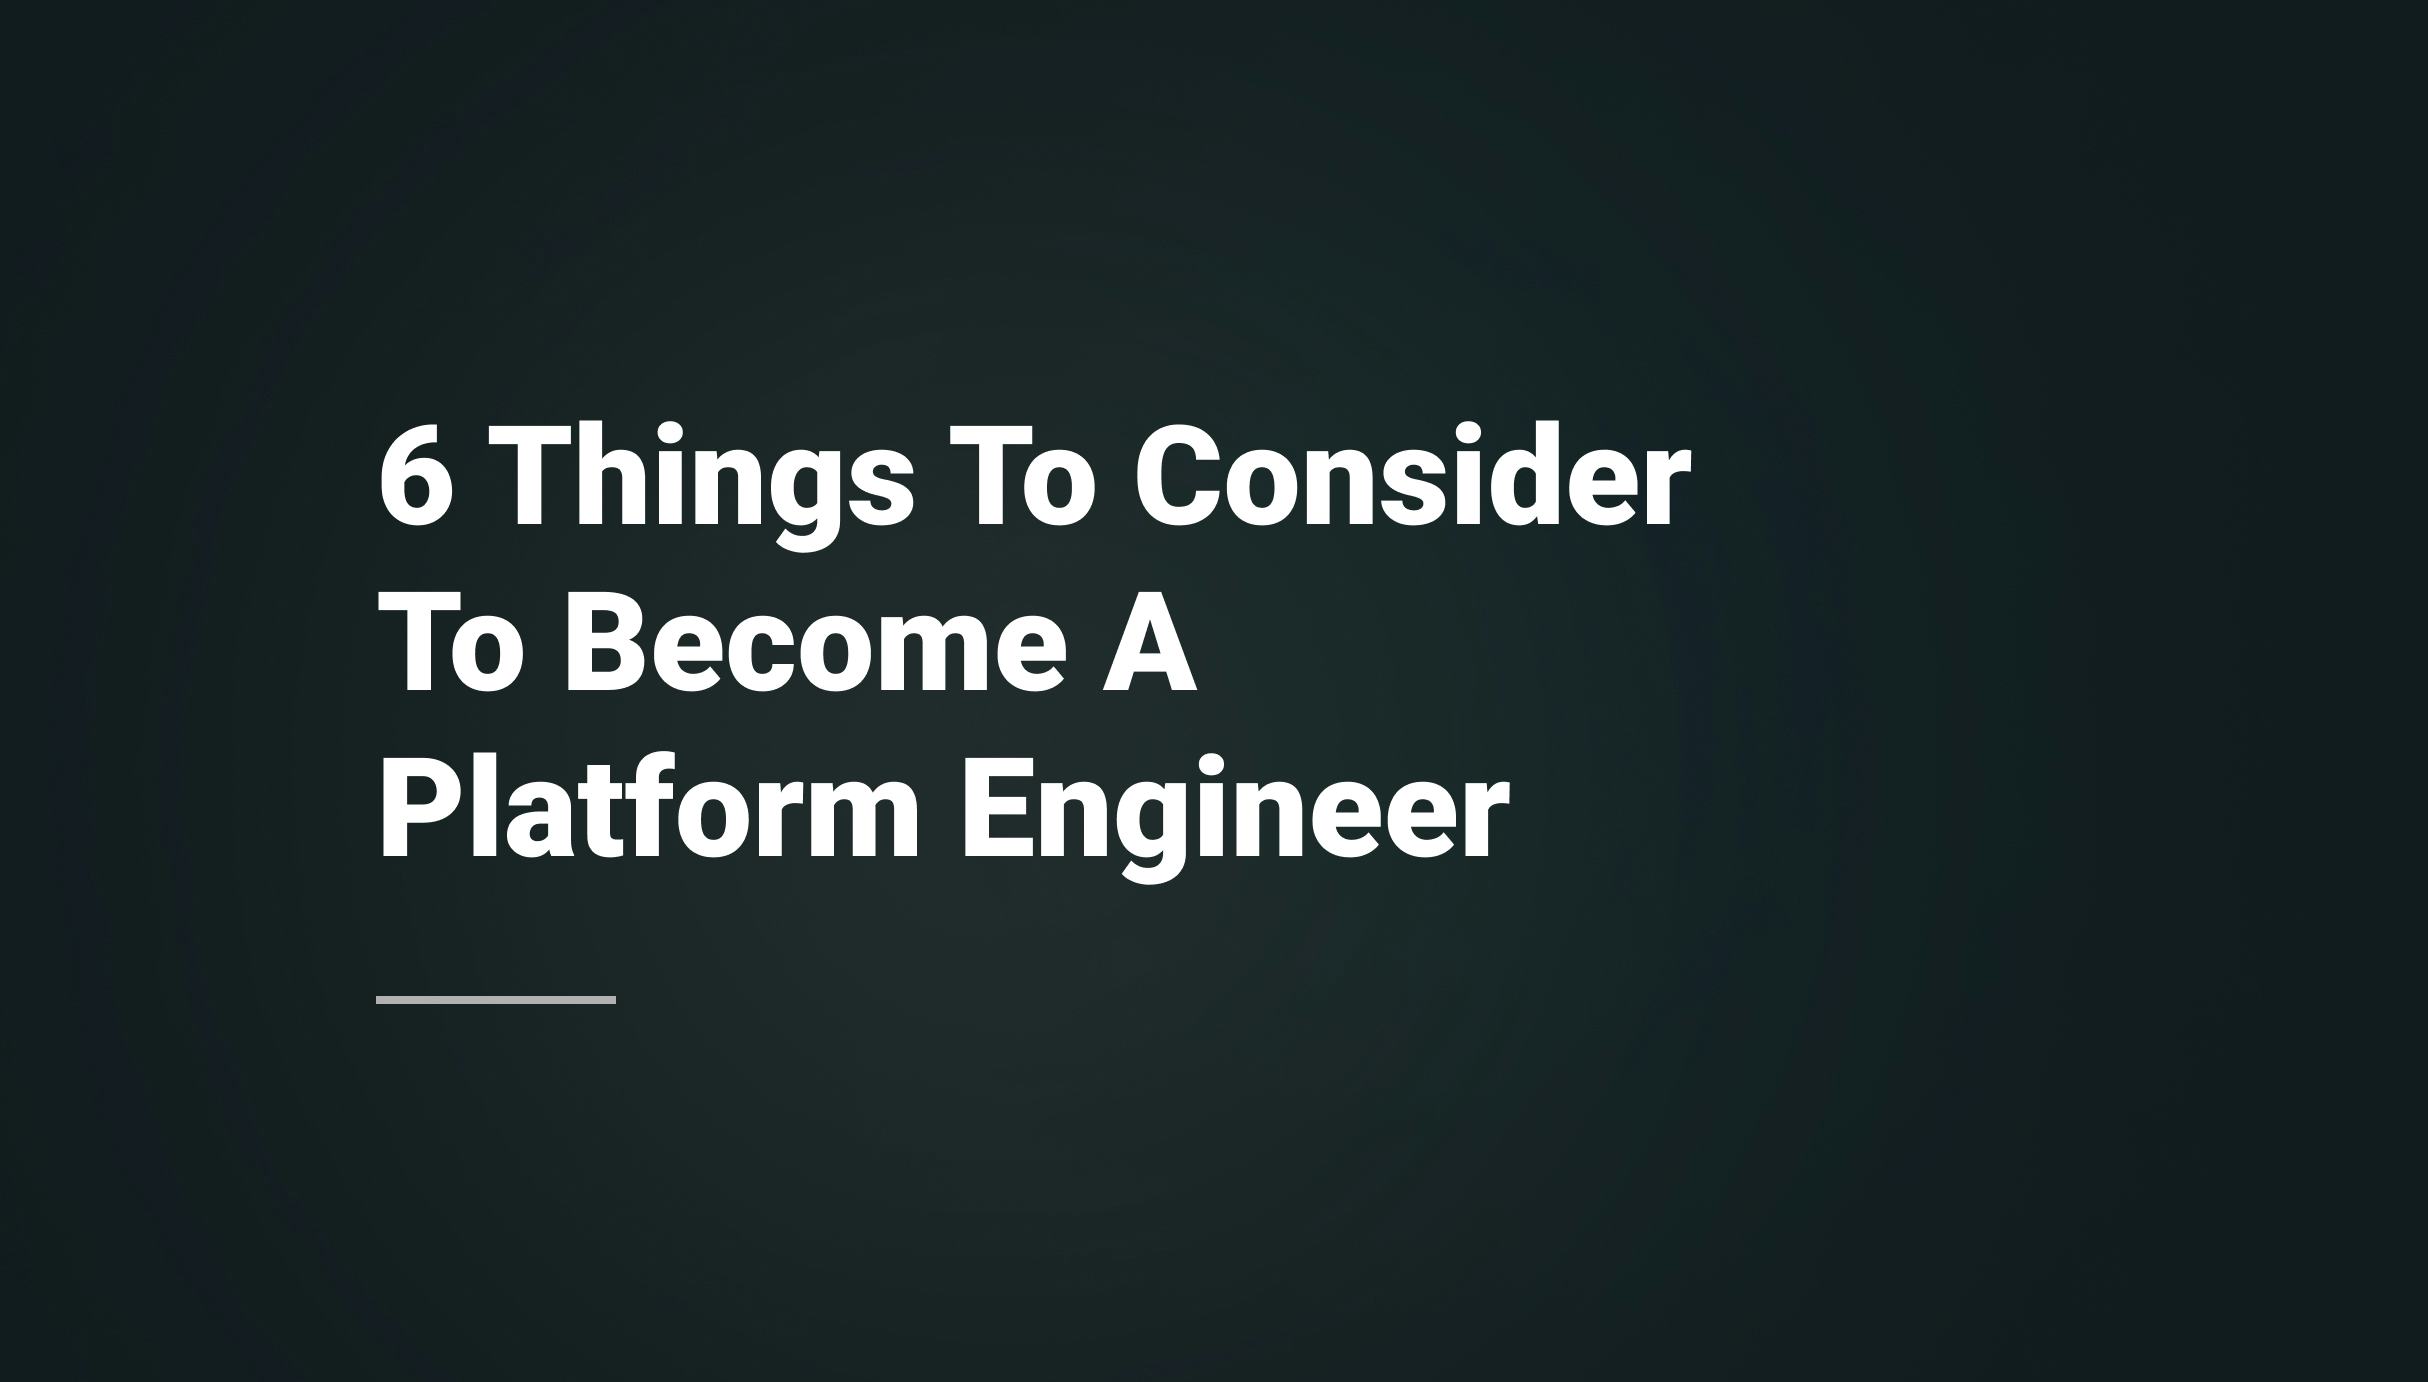 From DevOps to Platform Engineer: 6 Things You Should Consider in 2023 - Qovery